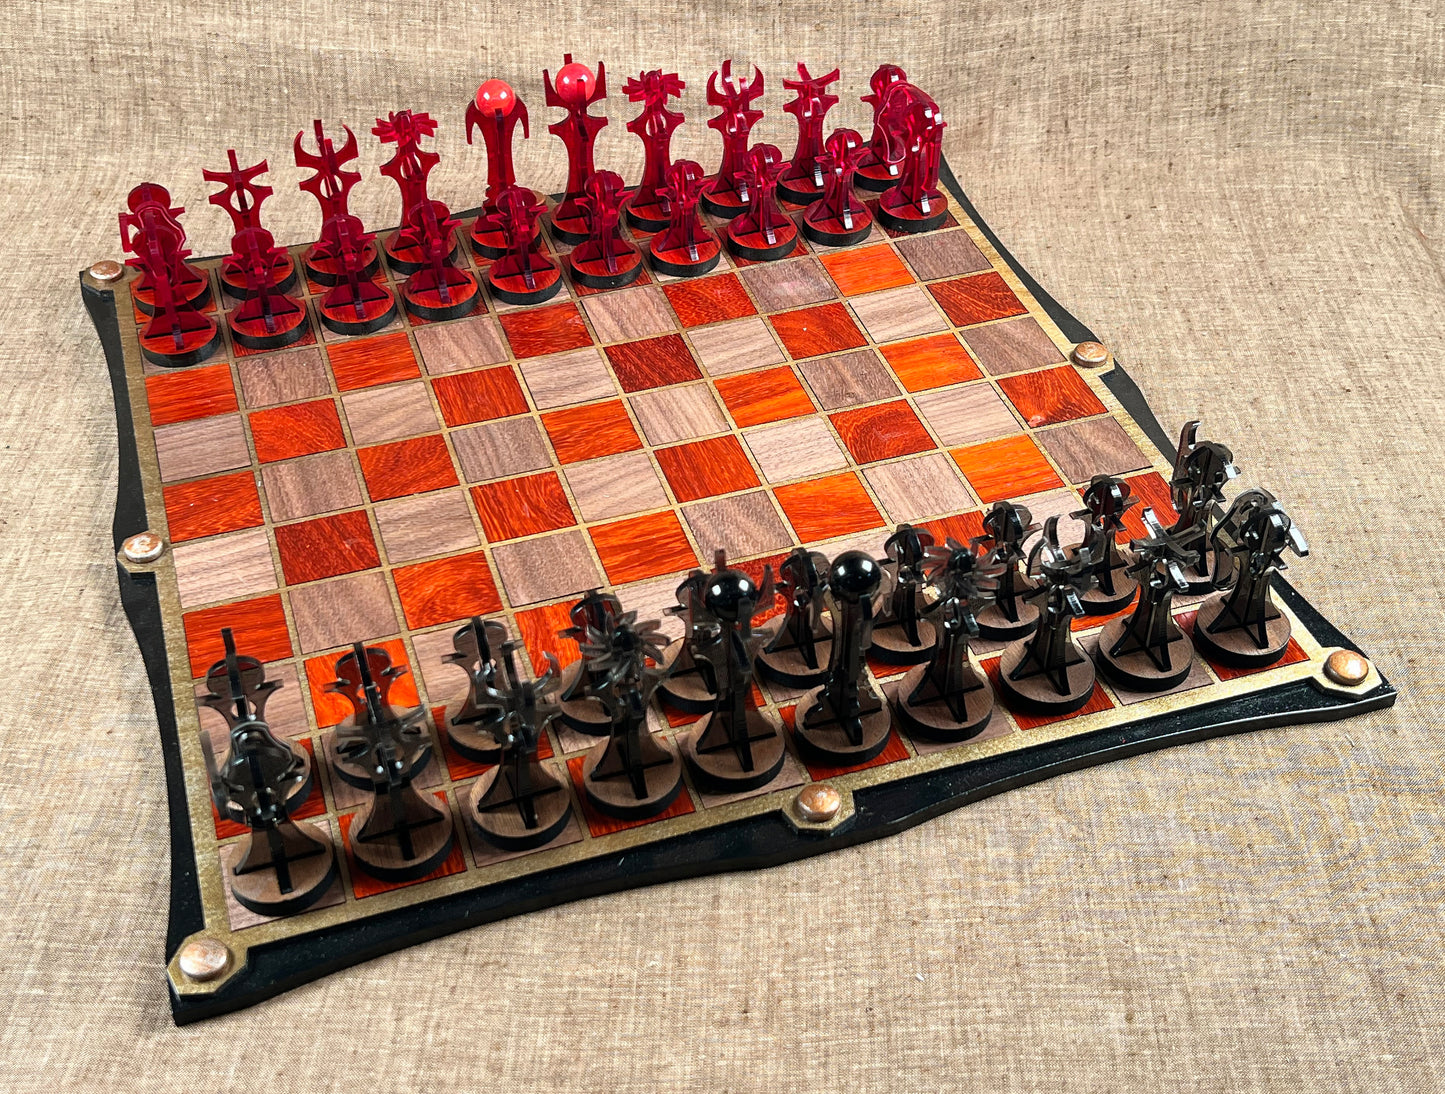 JETAN ~ Barsoomian Martian Chess. From the Mind of Edgar Rice Burroughs. Own a game from ANOTHER WORLD!